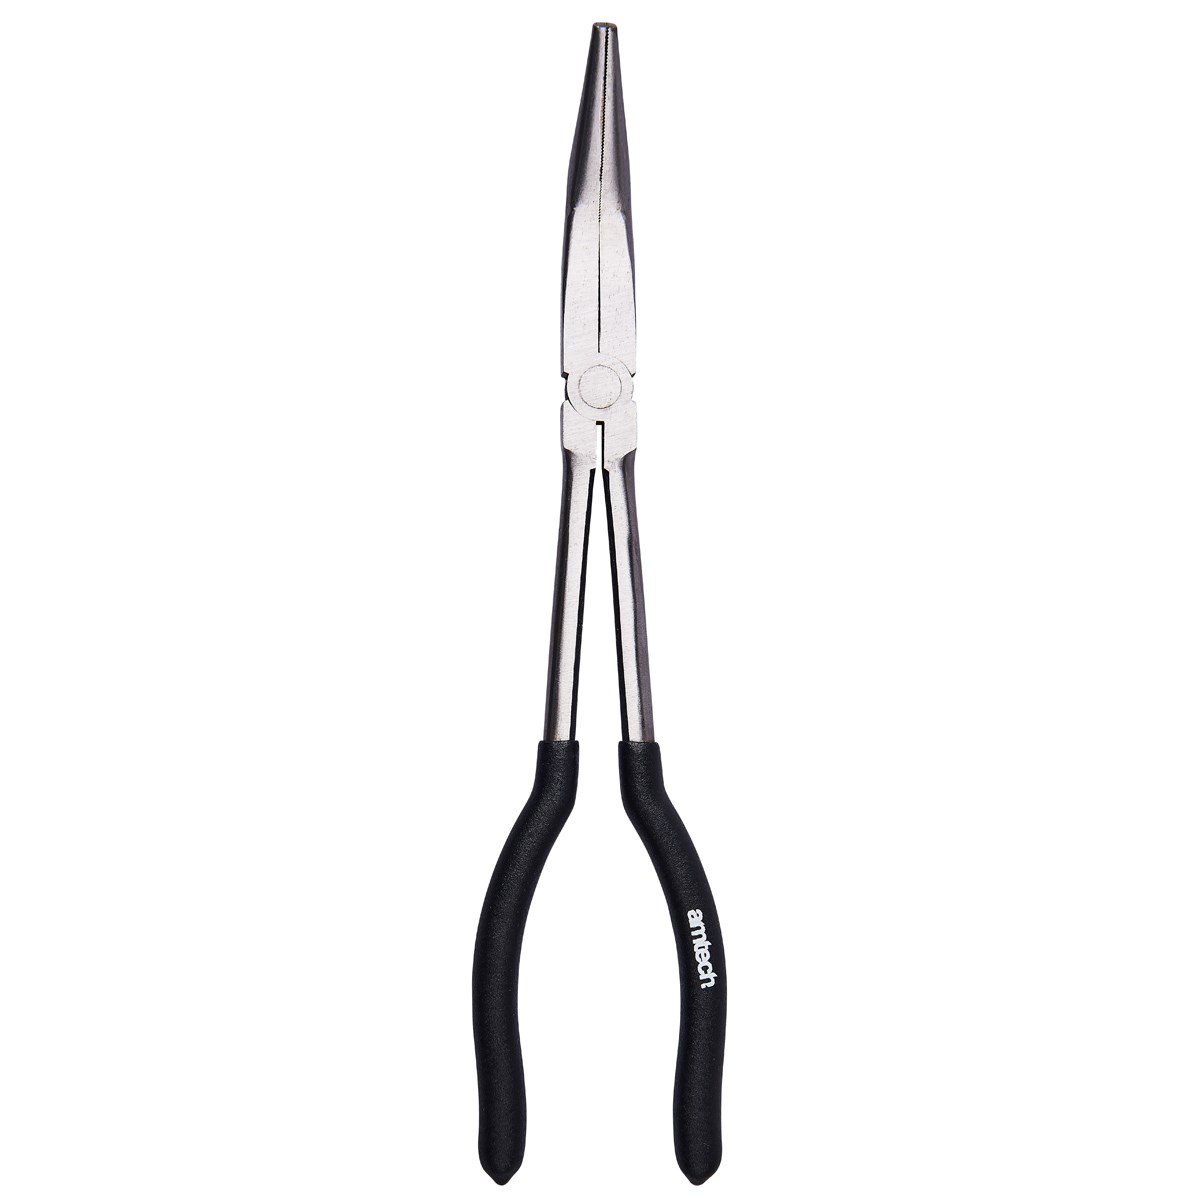 Agri Supply® Bent Nose Pliers, 45 Degrees, 11 In.